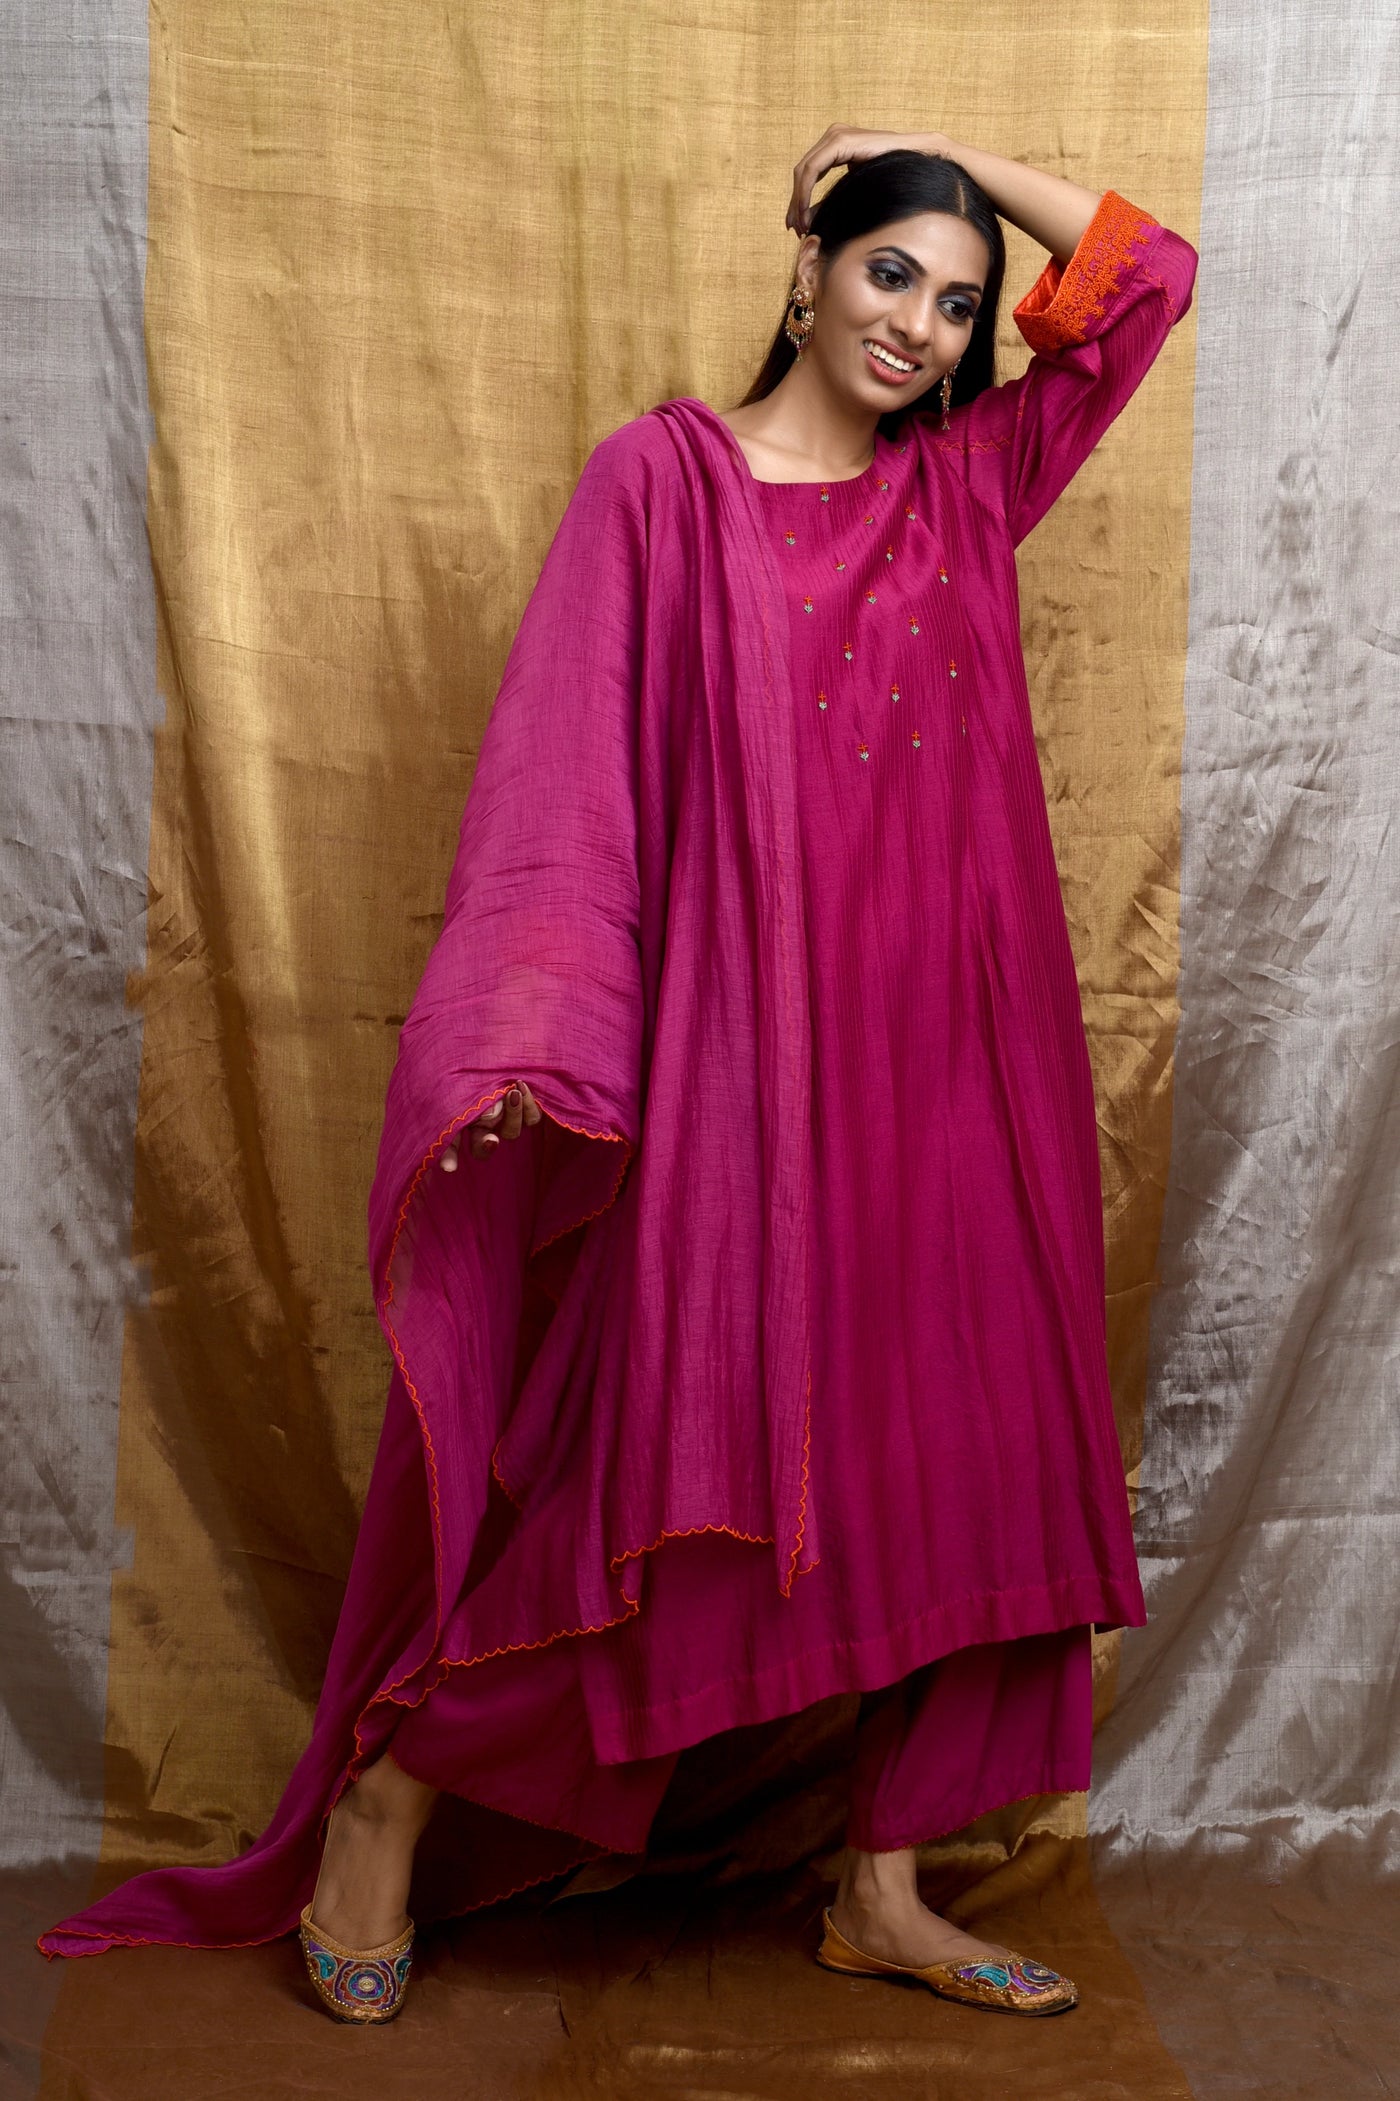 Fuchsia kurta Set - Indian Clothing in Denver, CO, Aurora, CO, Boulder, CO, Fort Collins, CO, Colorado Springs, CO, Parker, CO, Highlands Ranch, CO, Cherry Creek, CO, Centennial, CO, and Longmont, CO. Nationwide shipping USA - India Fashion X